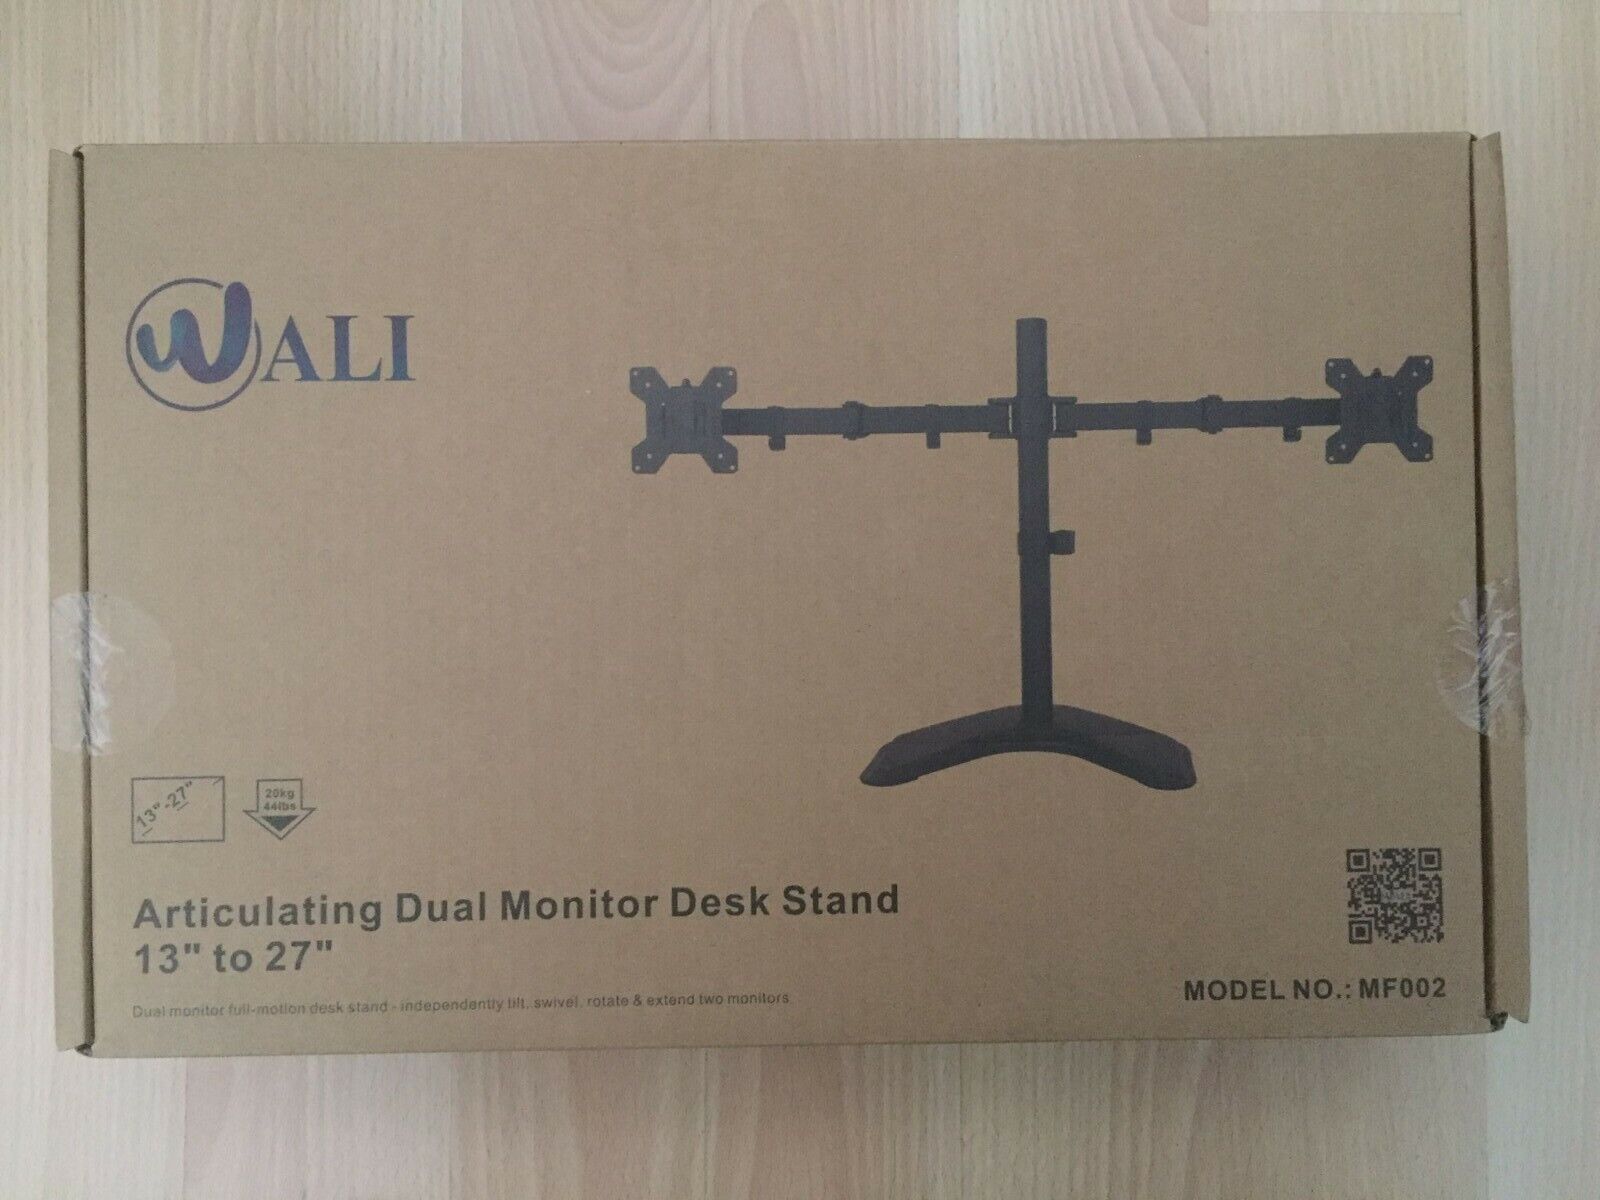 WALI GSDM002 Dual LCD Monitor Desk Mount - Black - up to 27"